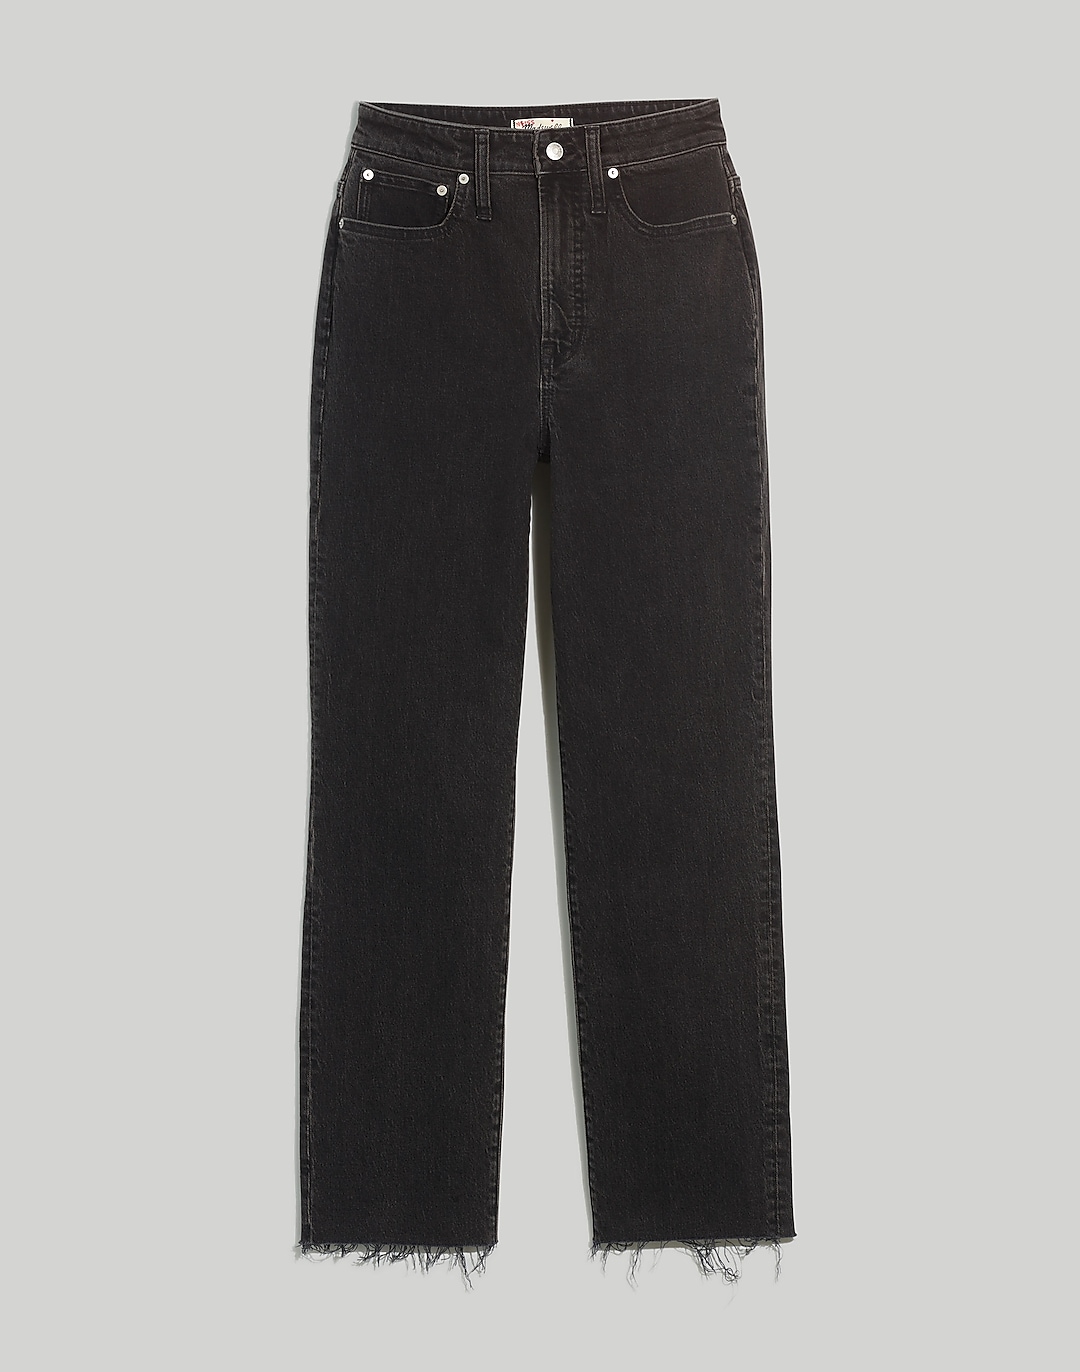 The Tall Perfect Vintage Jean | Madewell